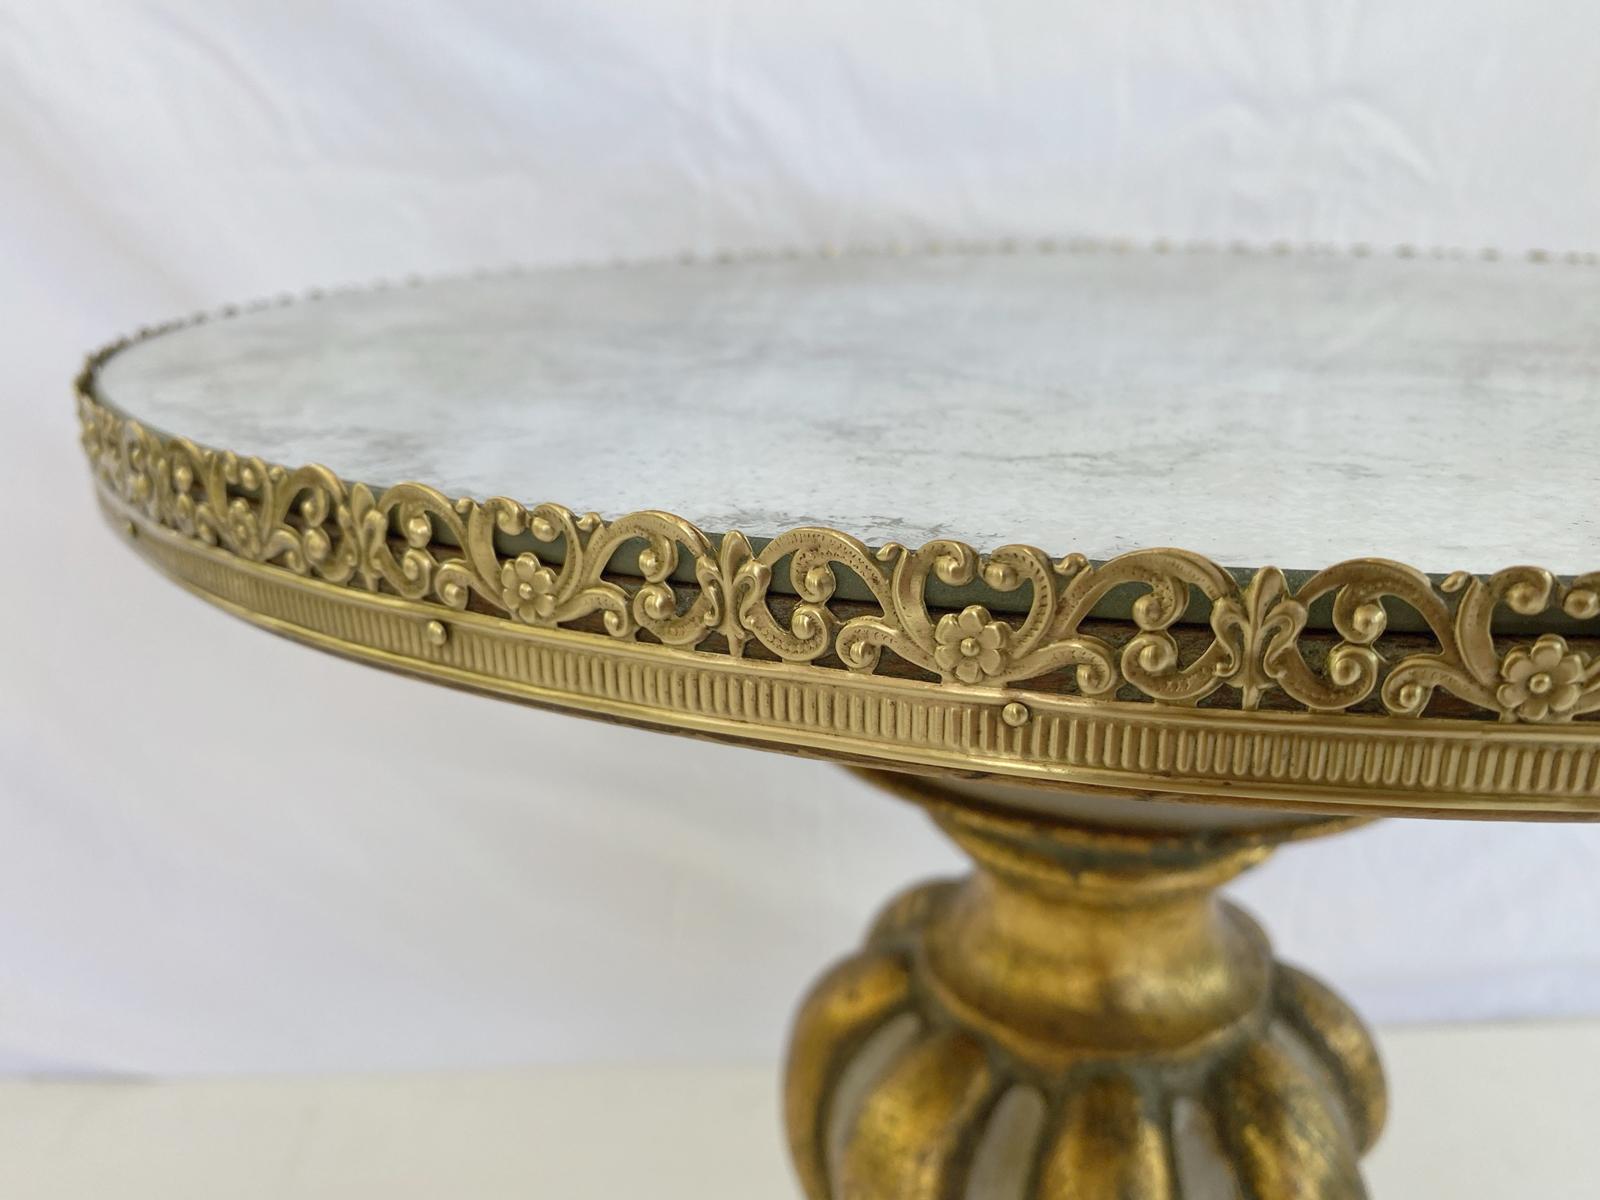 Side table, painted and parcel gilt finishes; having a round top of aged mirrorplate, bordered by a pierced, scrolling gallery of rosettes and fleur de lis, raised on a spiral-turned, ballustrade-form pedestal, ending on a round foot, and graduated